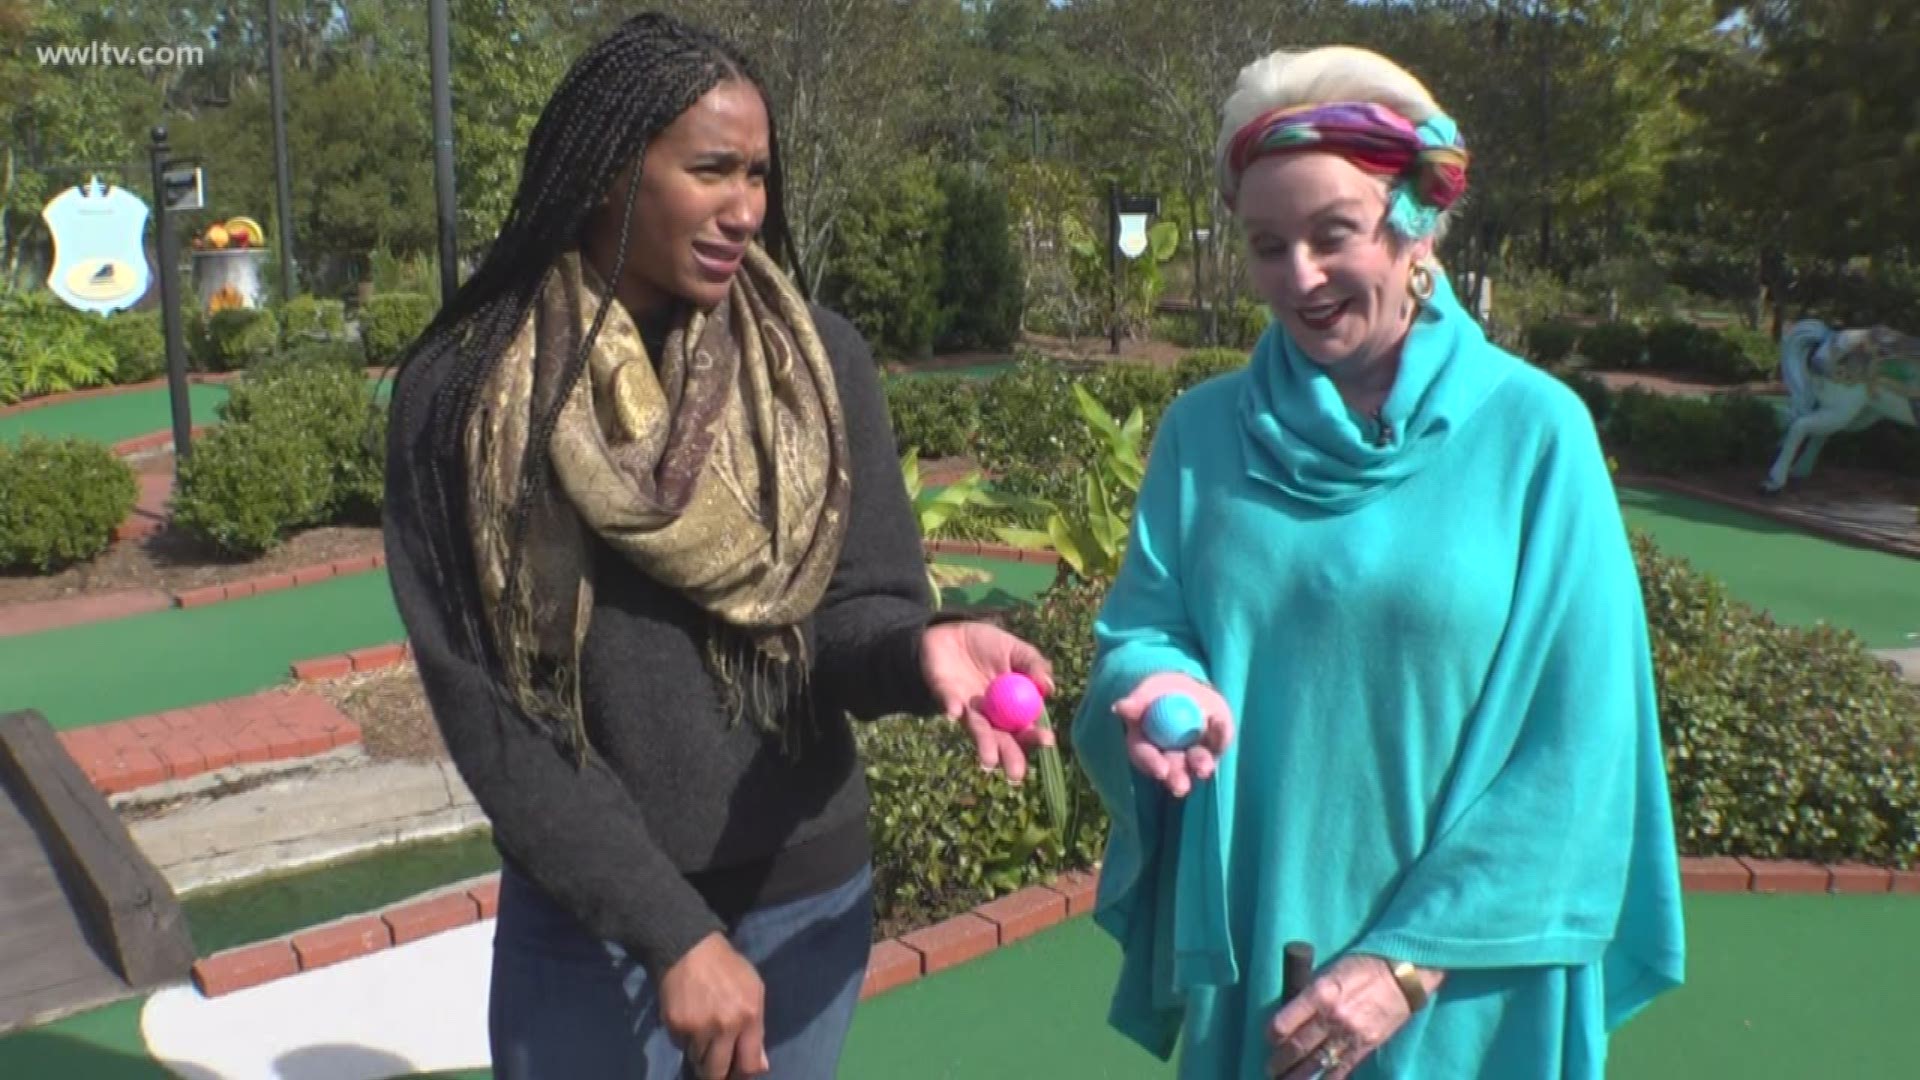 In this week's Another Vieux segment, New Orleans television legend is taking on mini-golf!
It turns out that Angela Hill is not only a queen of television.